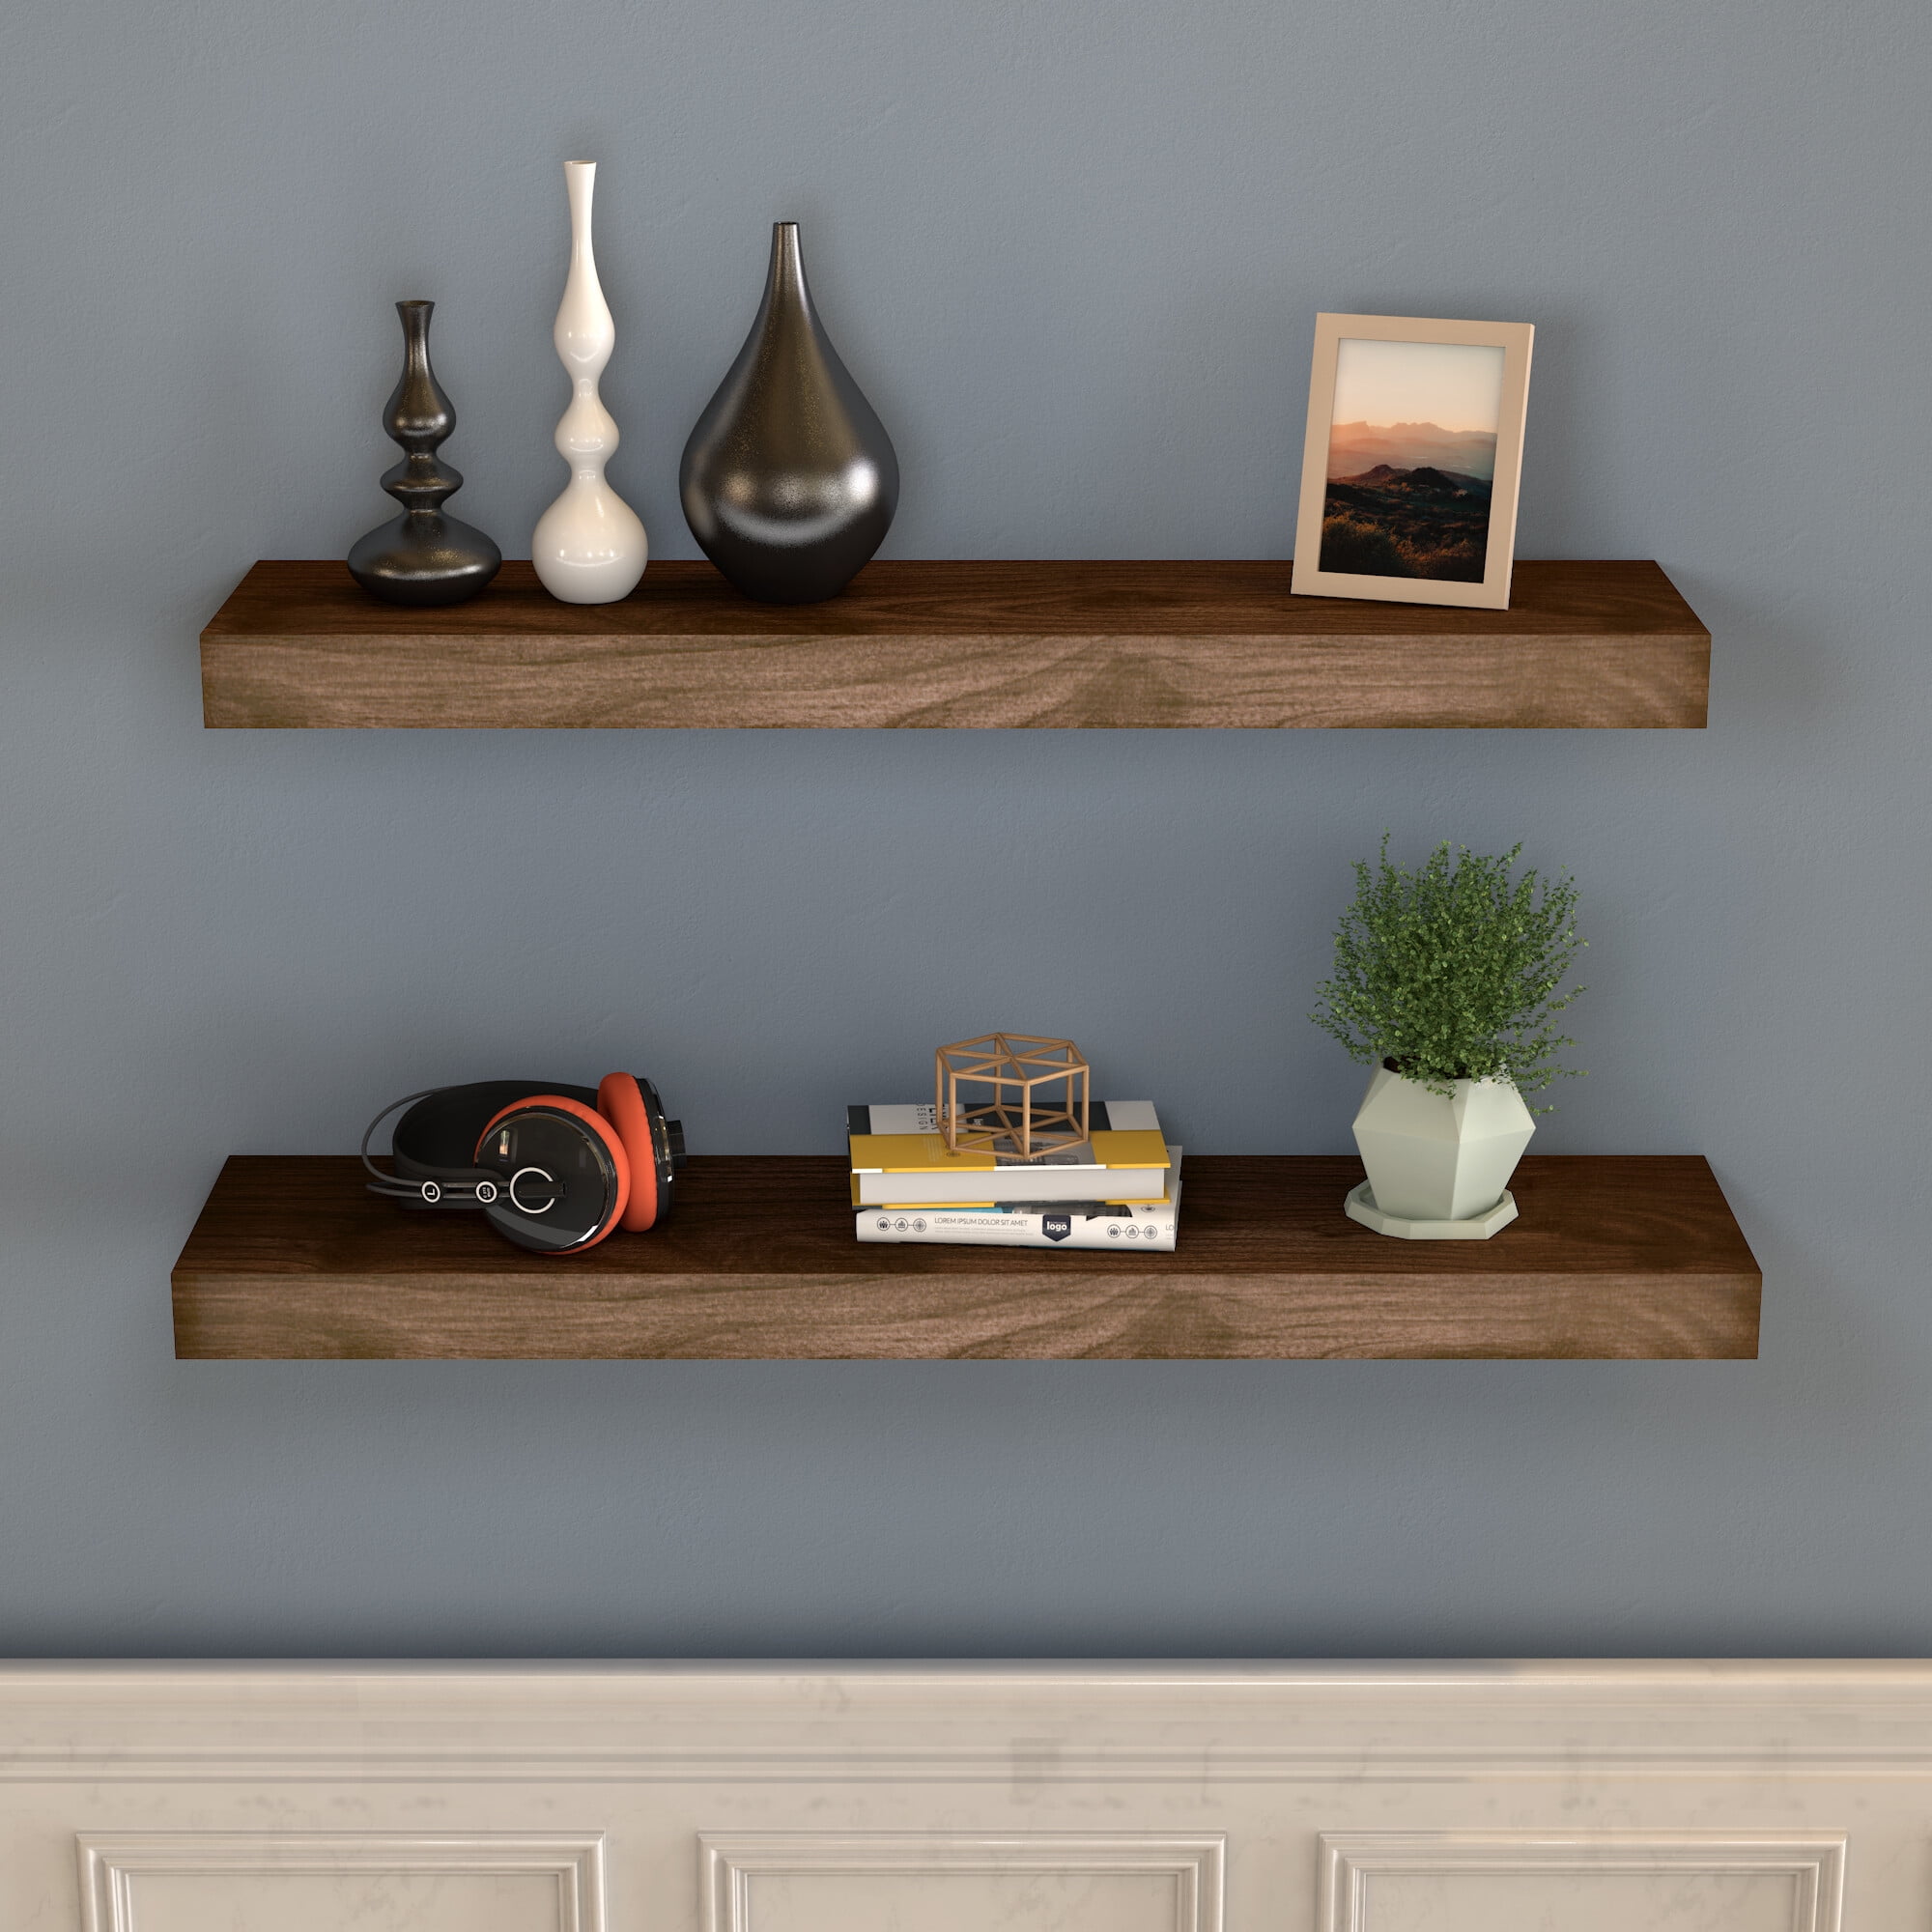 Giftgarden 47 Inch Long Floating Shelves for Wall, Rustic Picture Ledge  Large Shelf for Living Room Bedroom Bathroom Kitchen, Set of 3 Different  Sizes